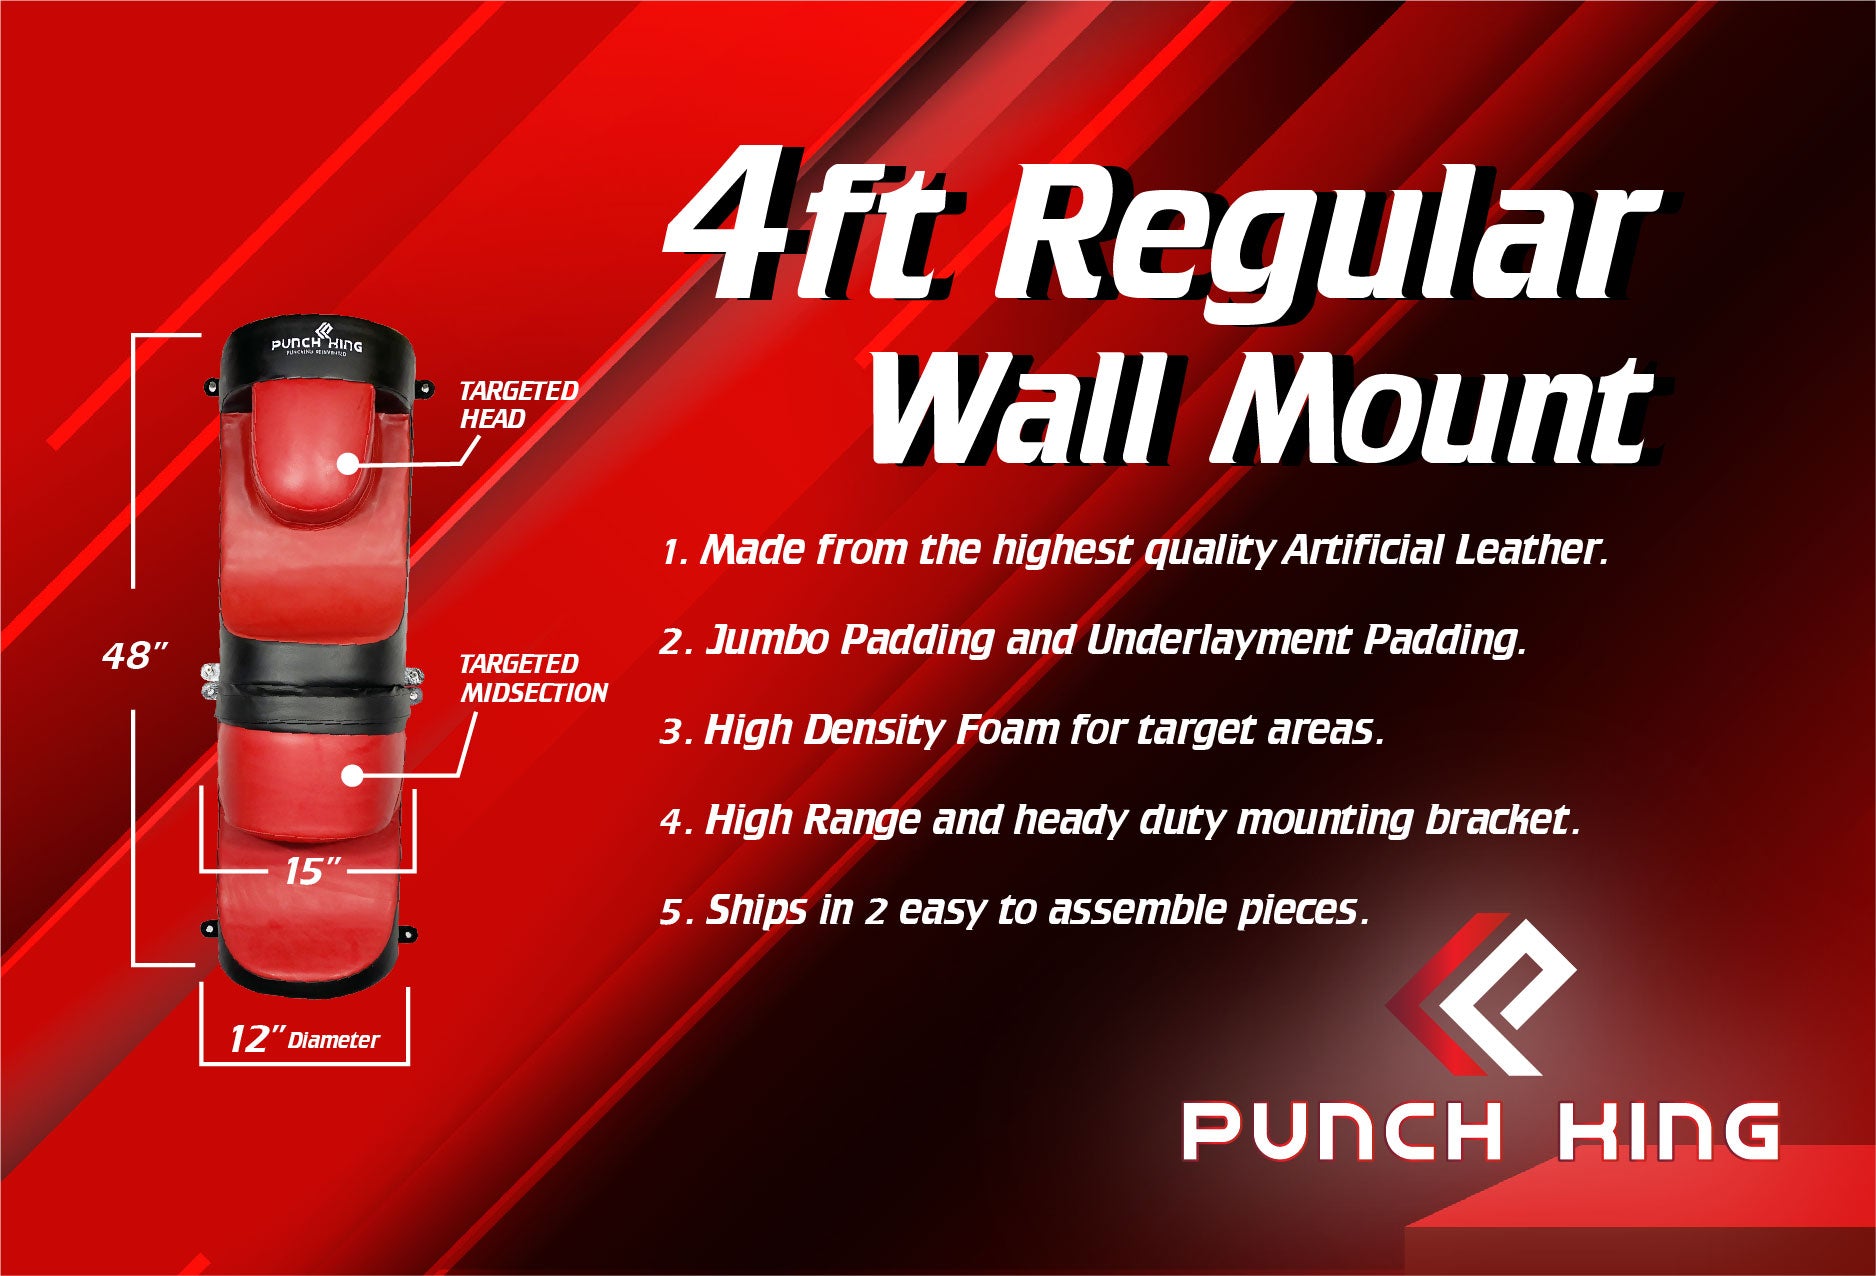 CLEARANCE - The Wall Mount Regular 4ft Striking System